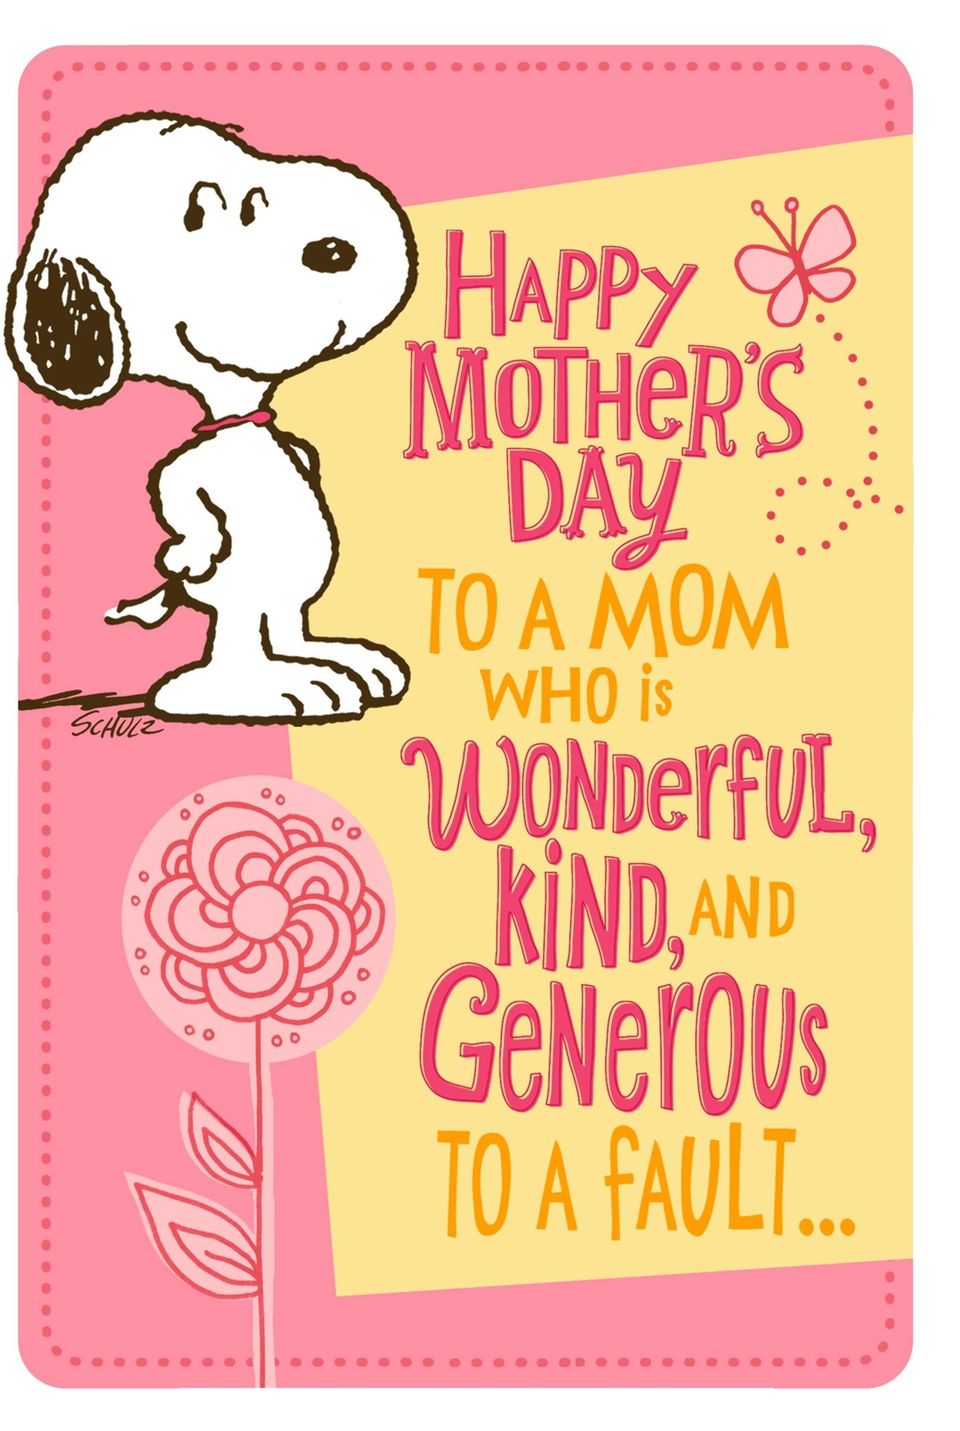 Hallmark Mother's Day cards through the years | Newsday